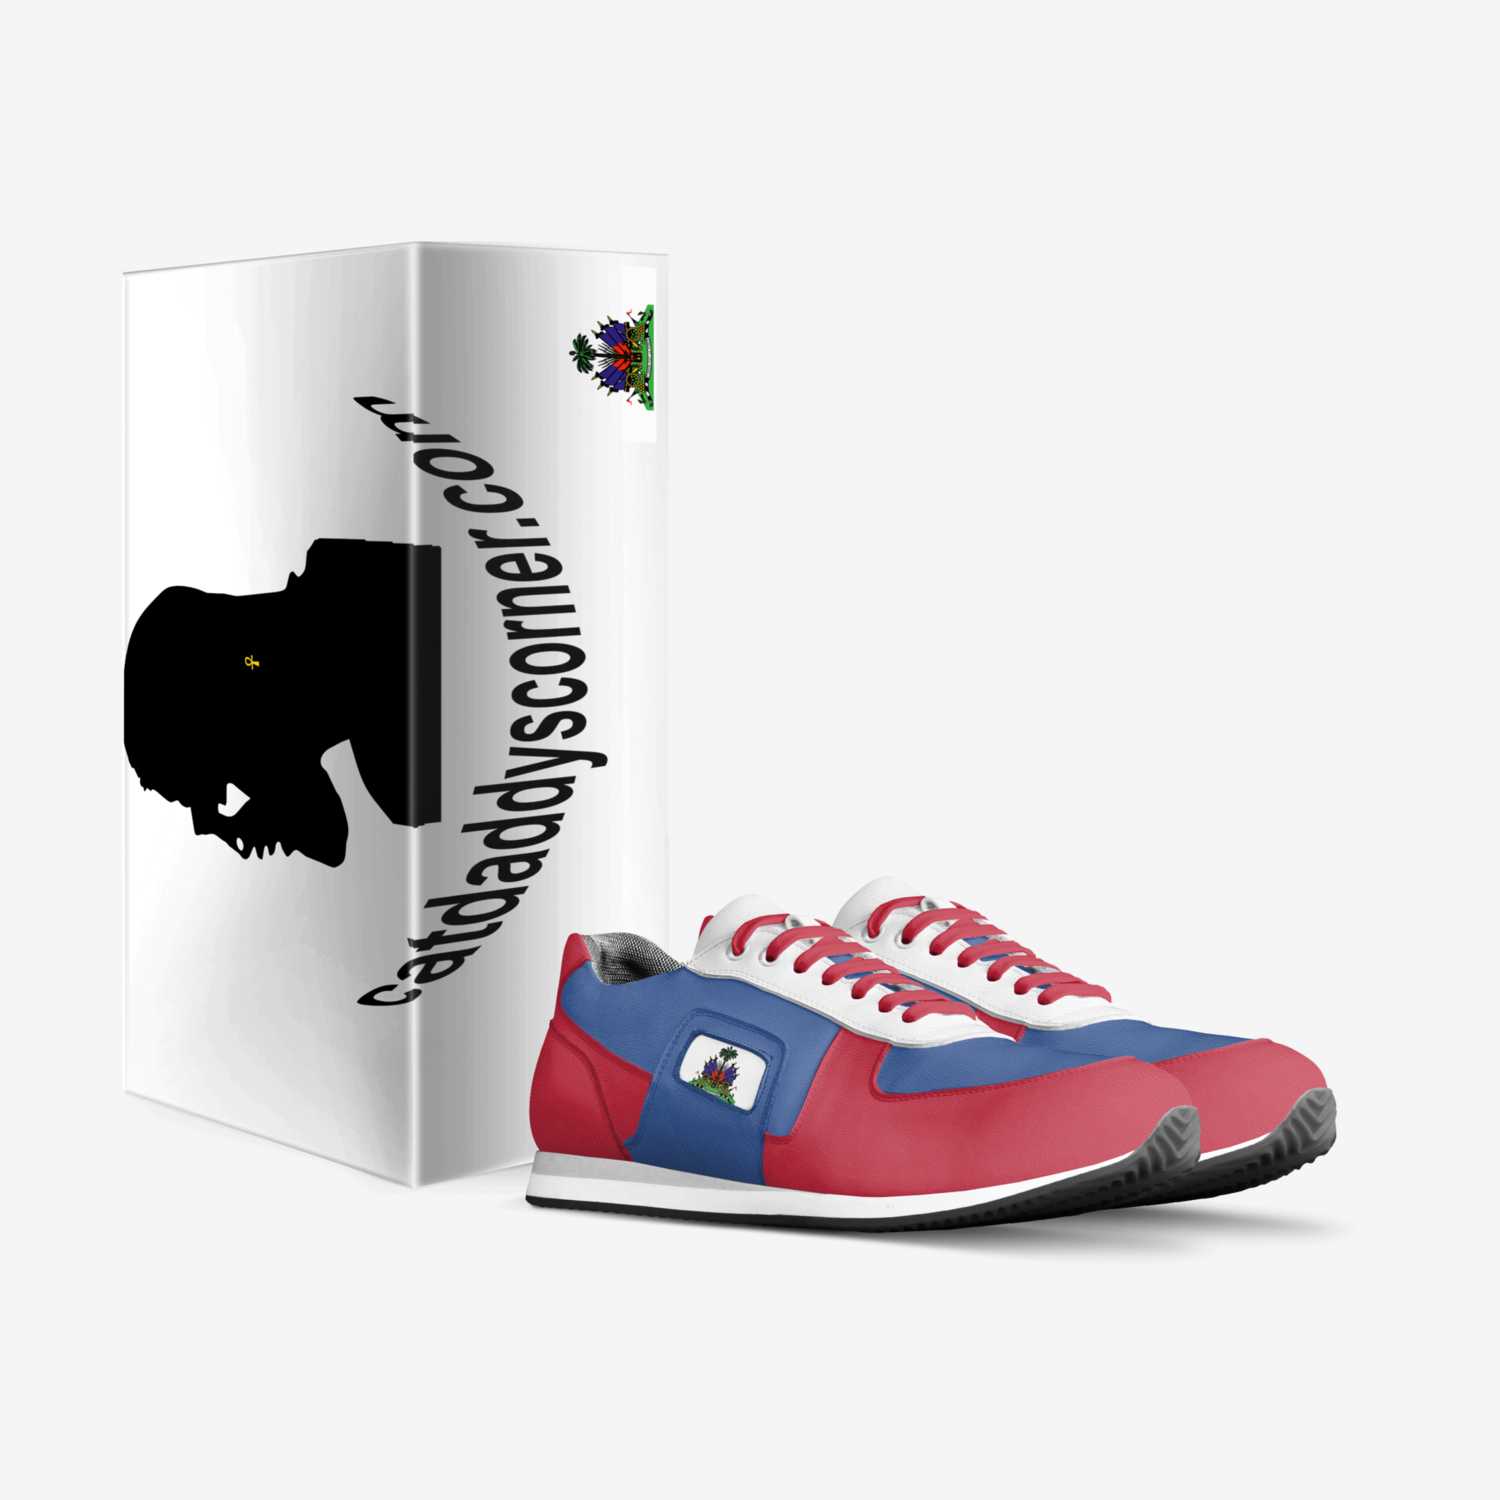 Haitian Pride custom made in Italy shoes by Scott Thomas | Box view